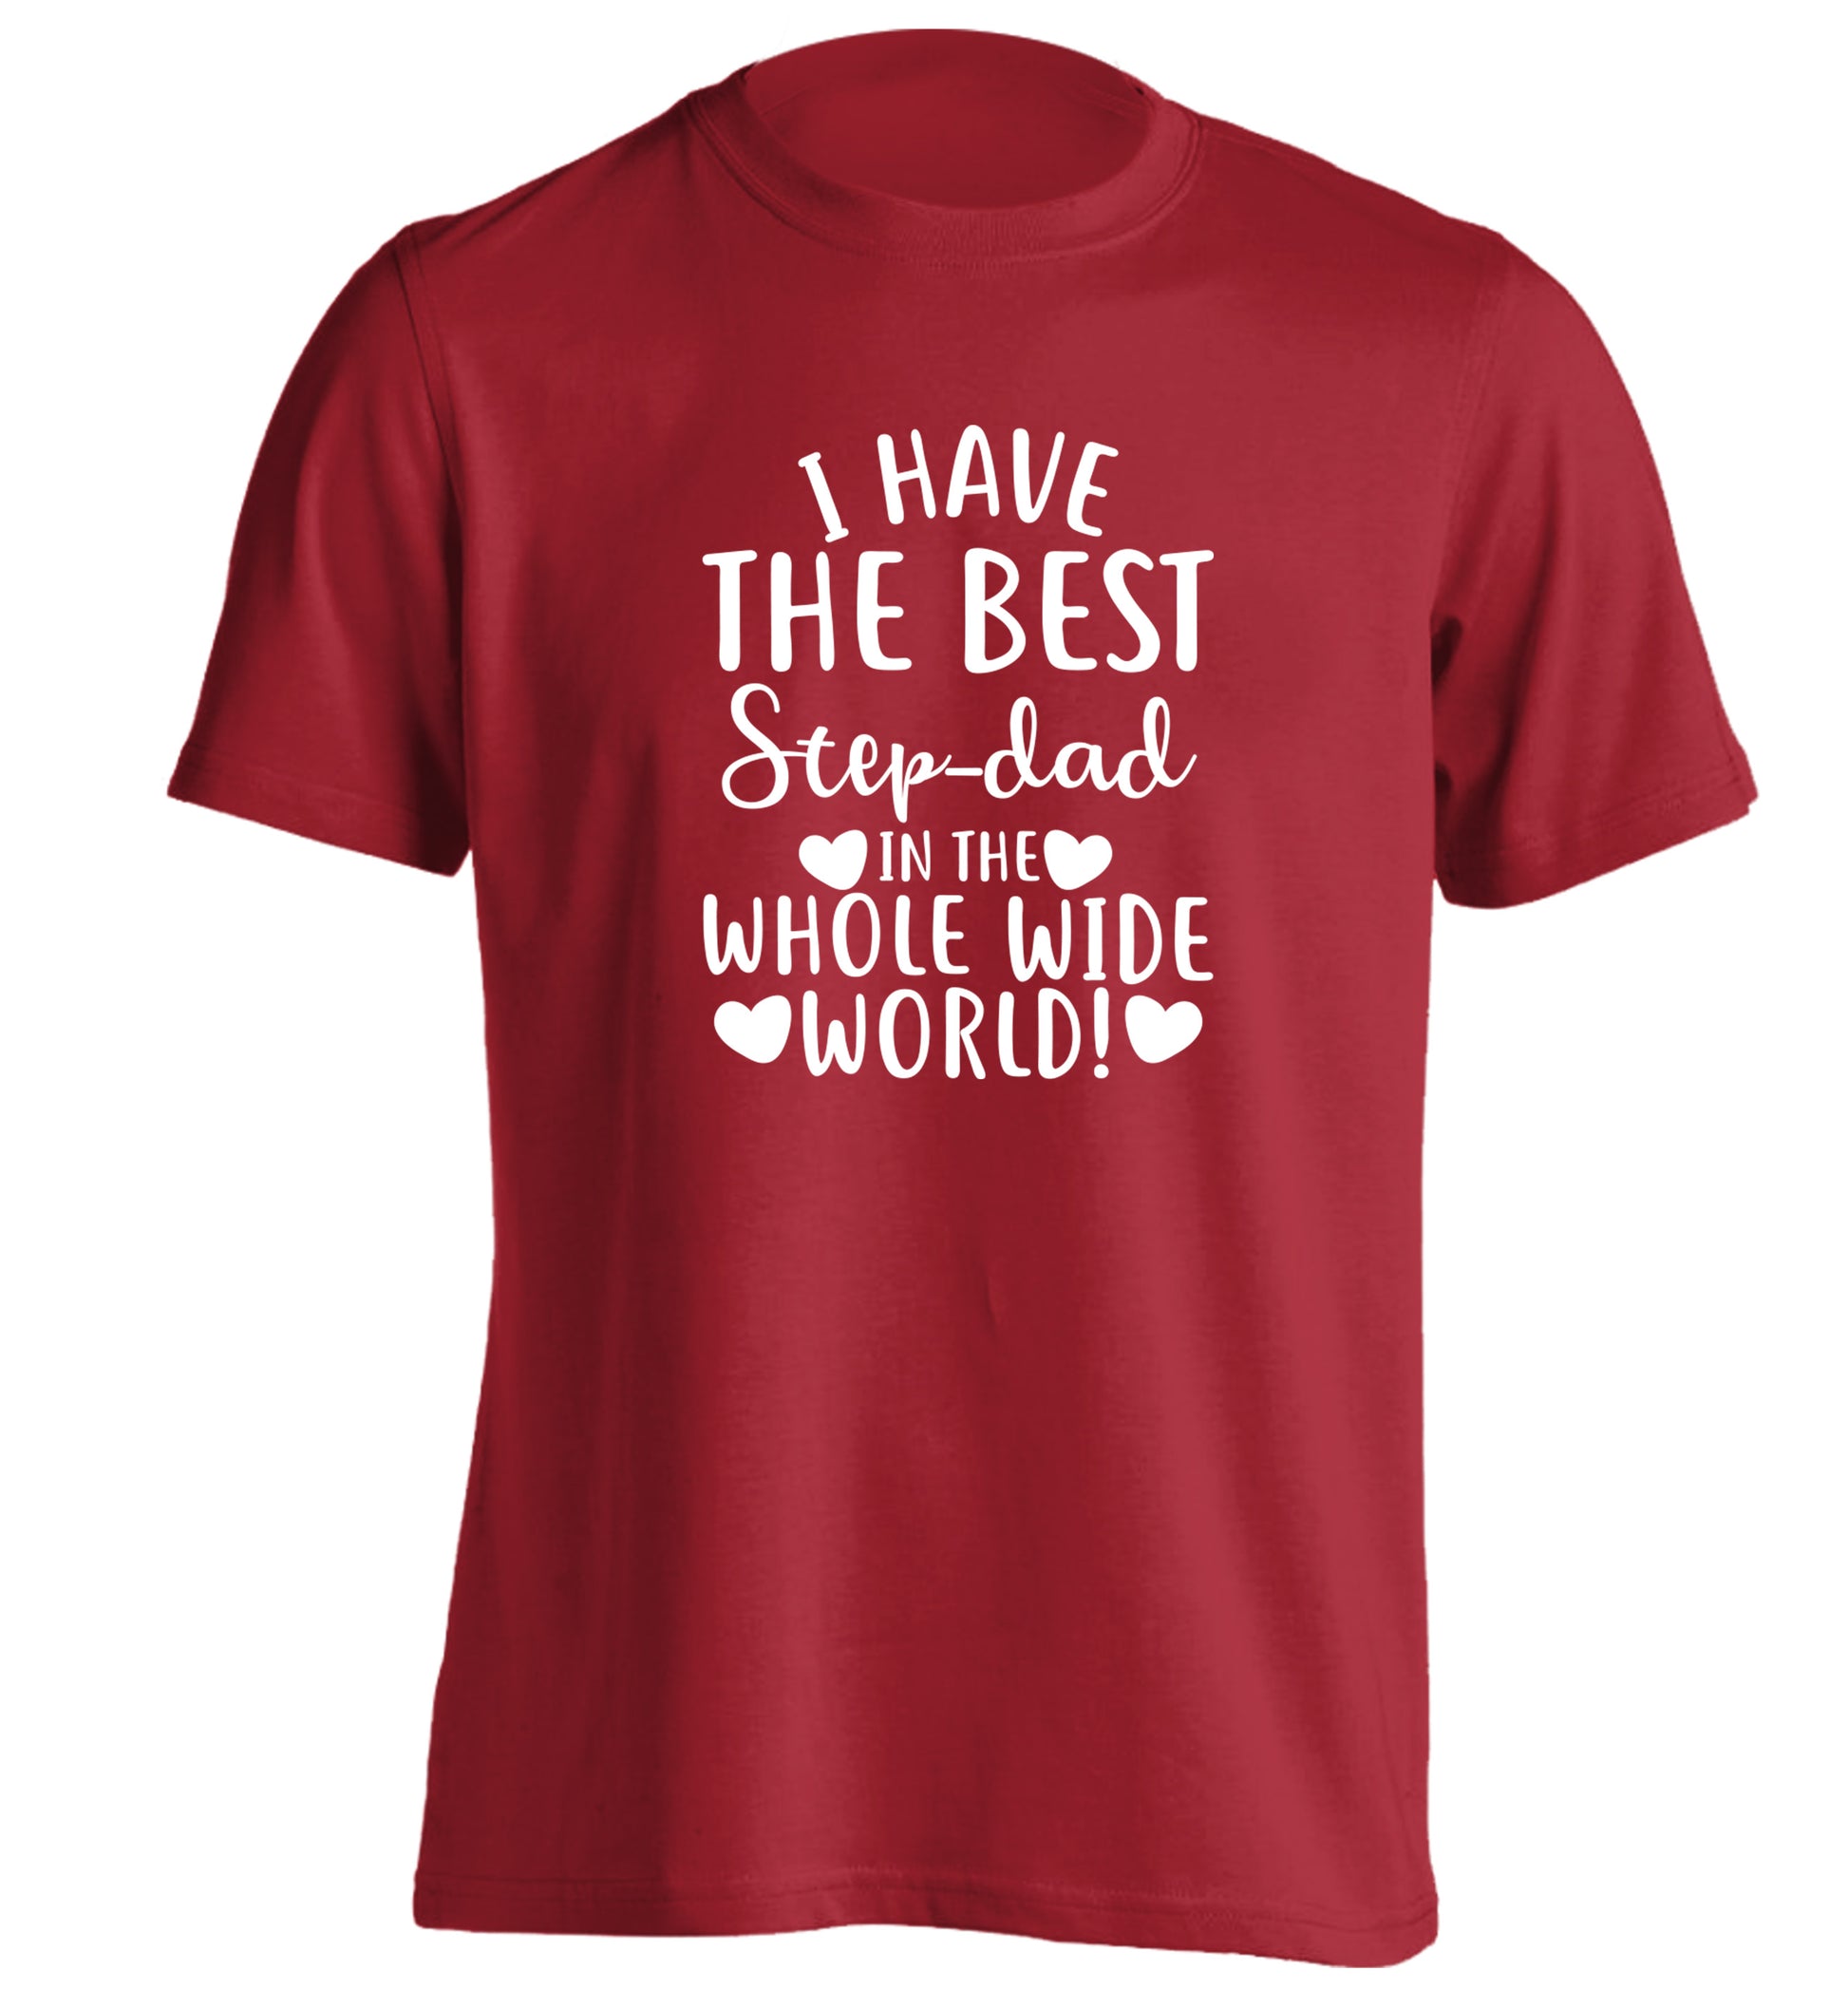 I have the best step-dad in the whole wide world! adults unisex red Tshirt 2XL